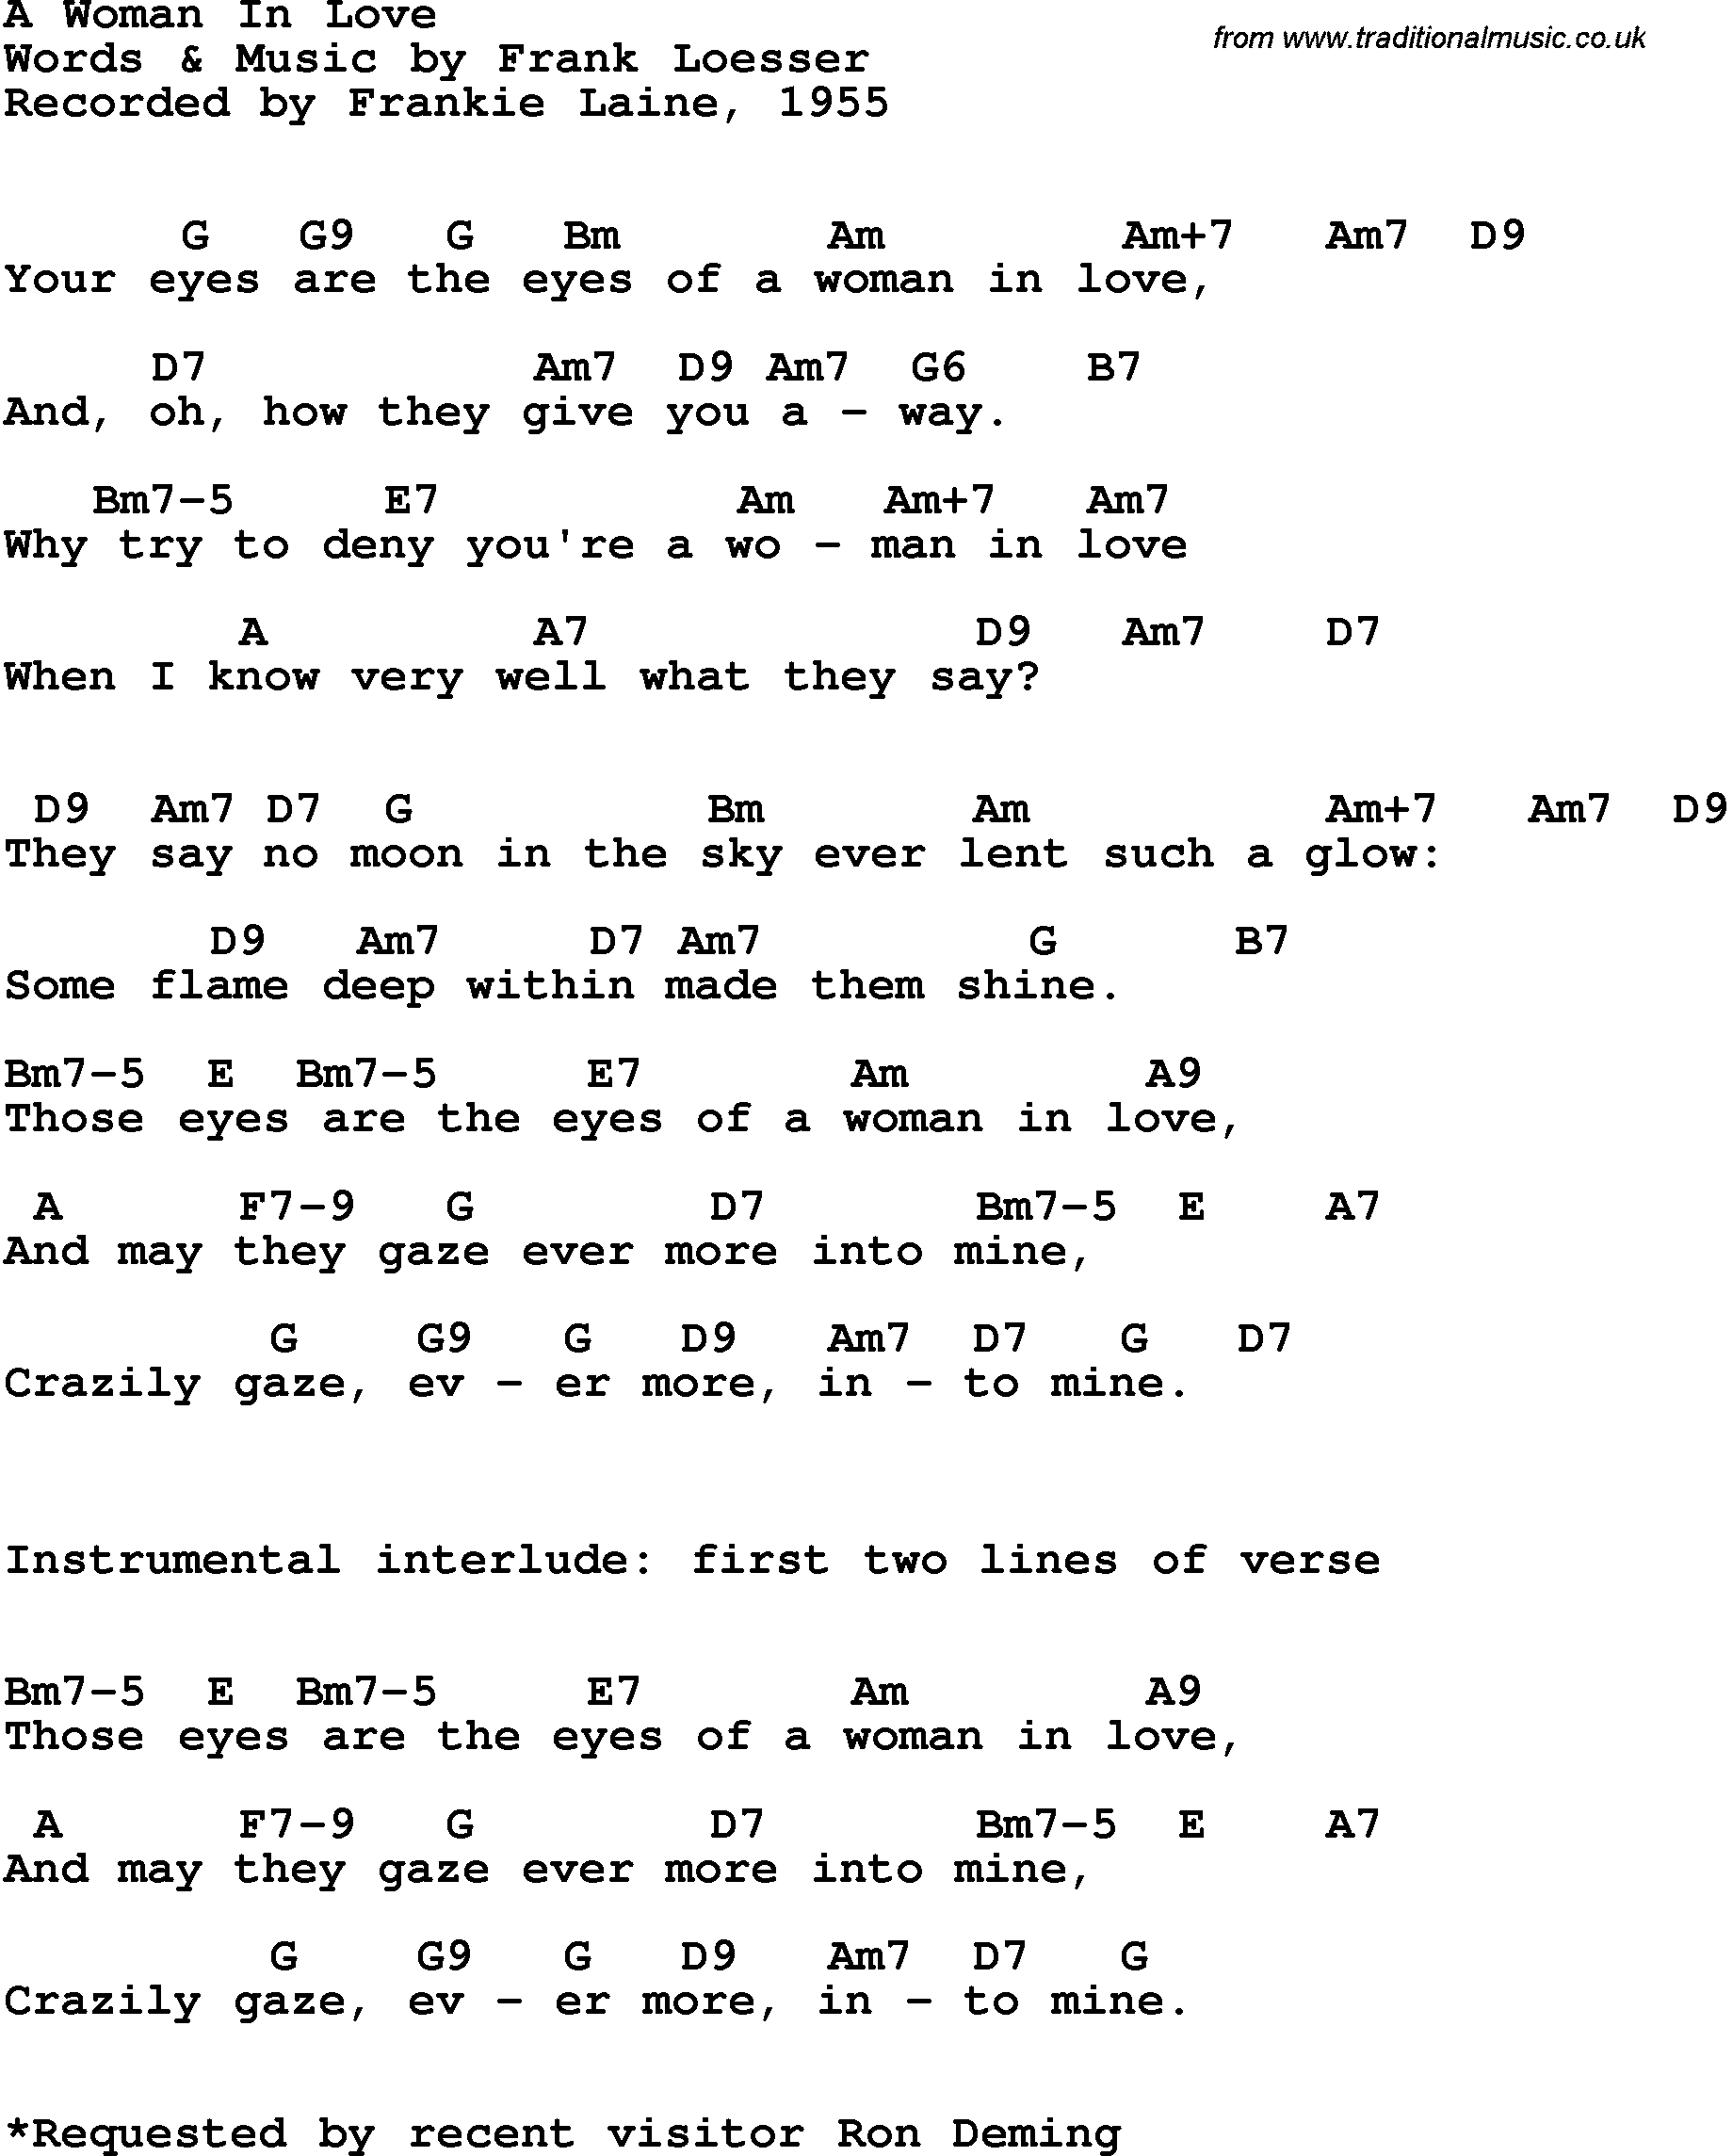 Song Lyrics with guitar chords for A Woman In Love - Frankie Laine, 1955